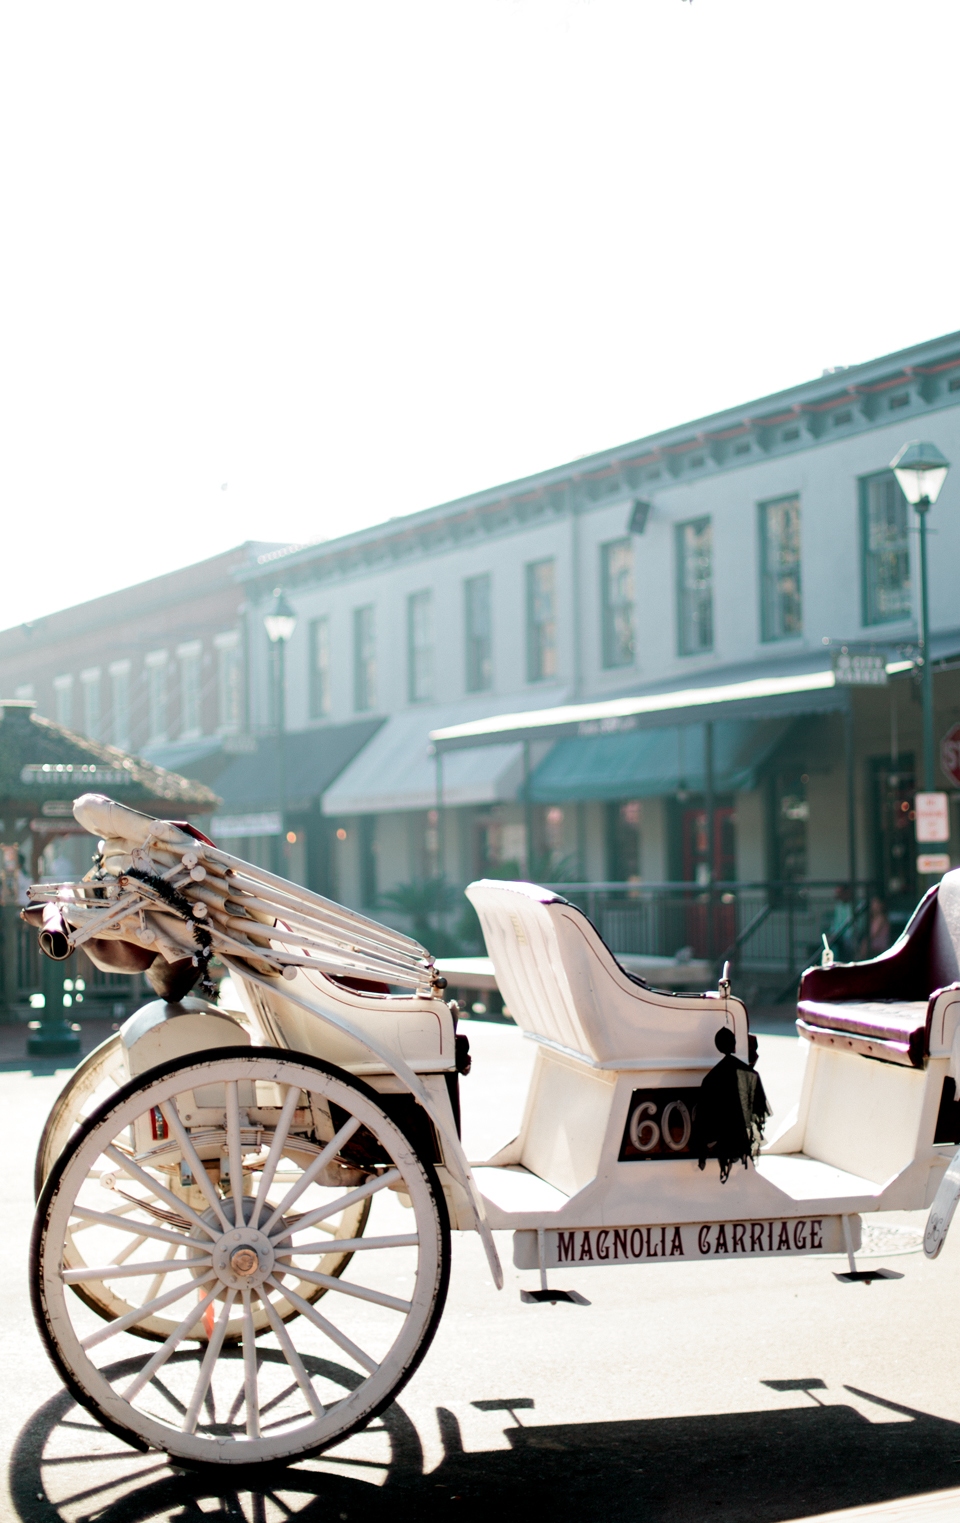 Image of downtown historic Savannah, Georgia.  This is a horse drawn carriage for local tours.